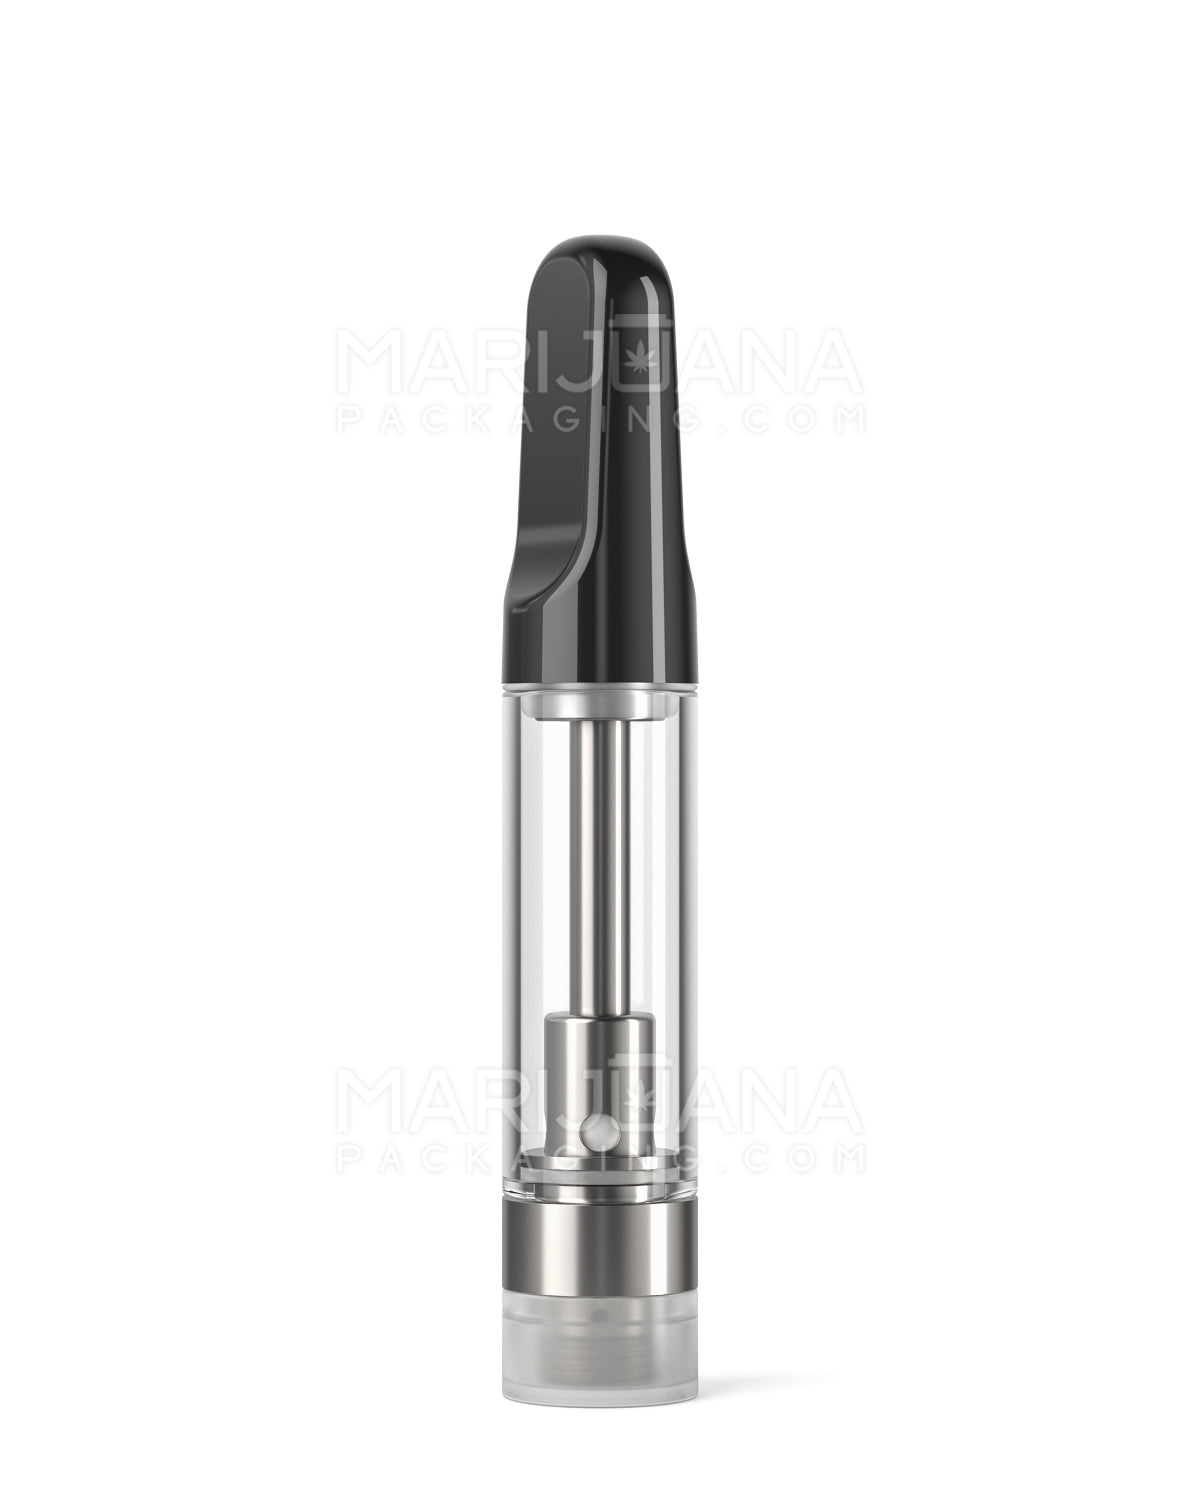 CCELL | Liquid6 Reactor Glass Vape Cartridge with Black Ceramic Mouthpiece | 1mL - Screw On - 100 Count - 3